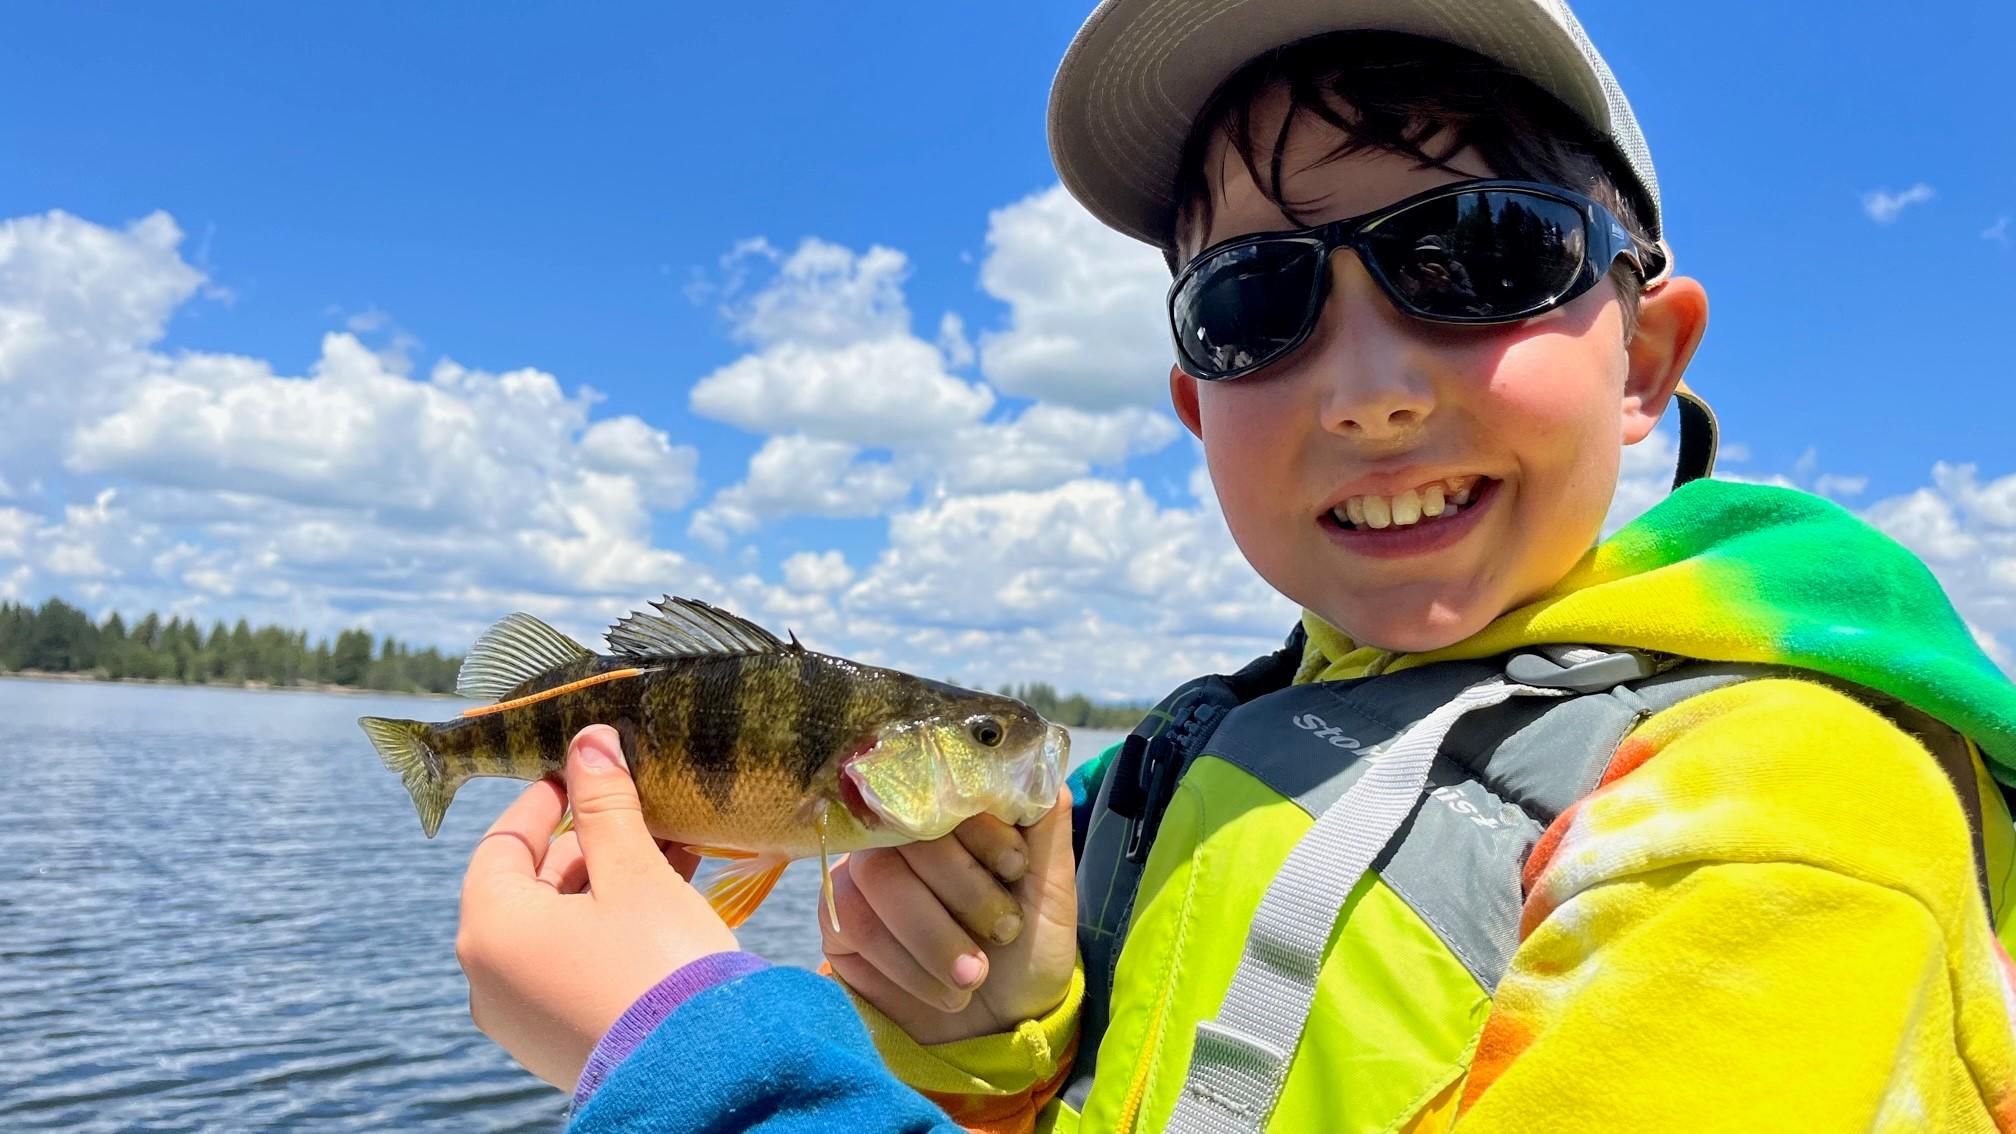 A young angler holds a perch with an orange tag near its dorsal fin.